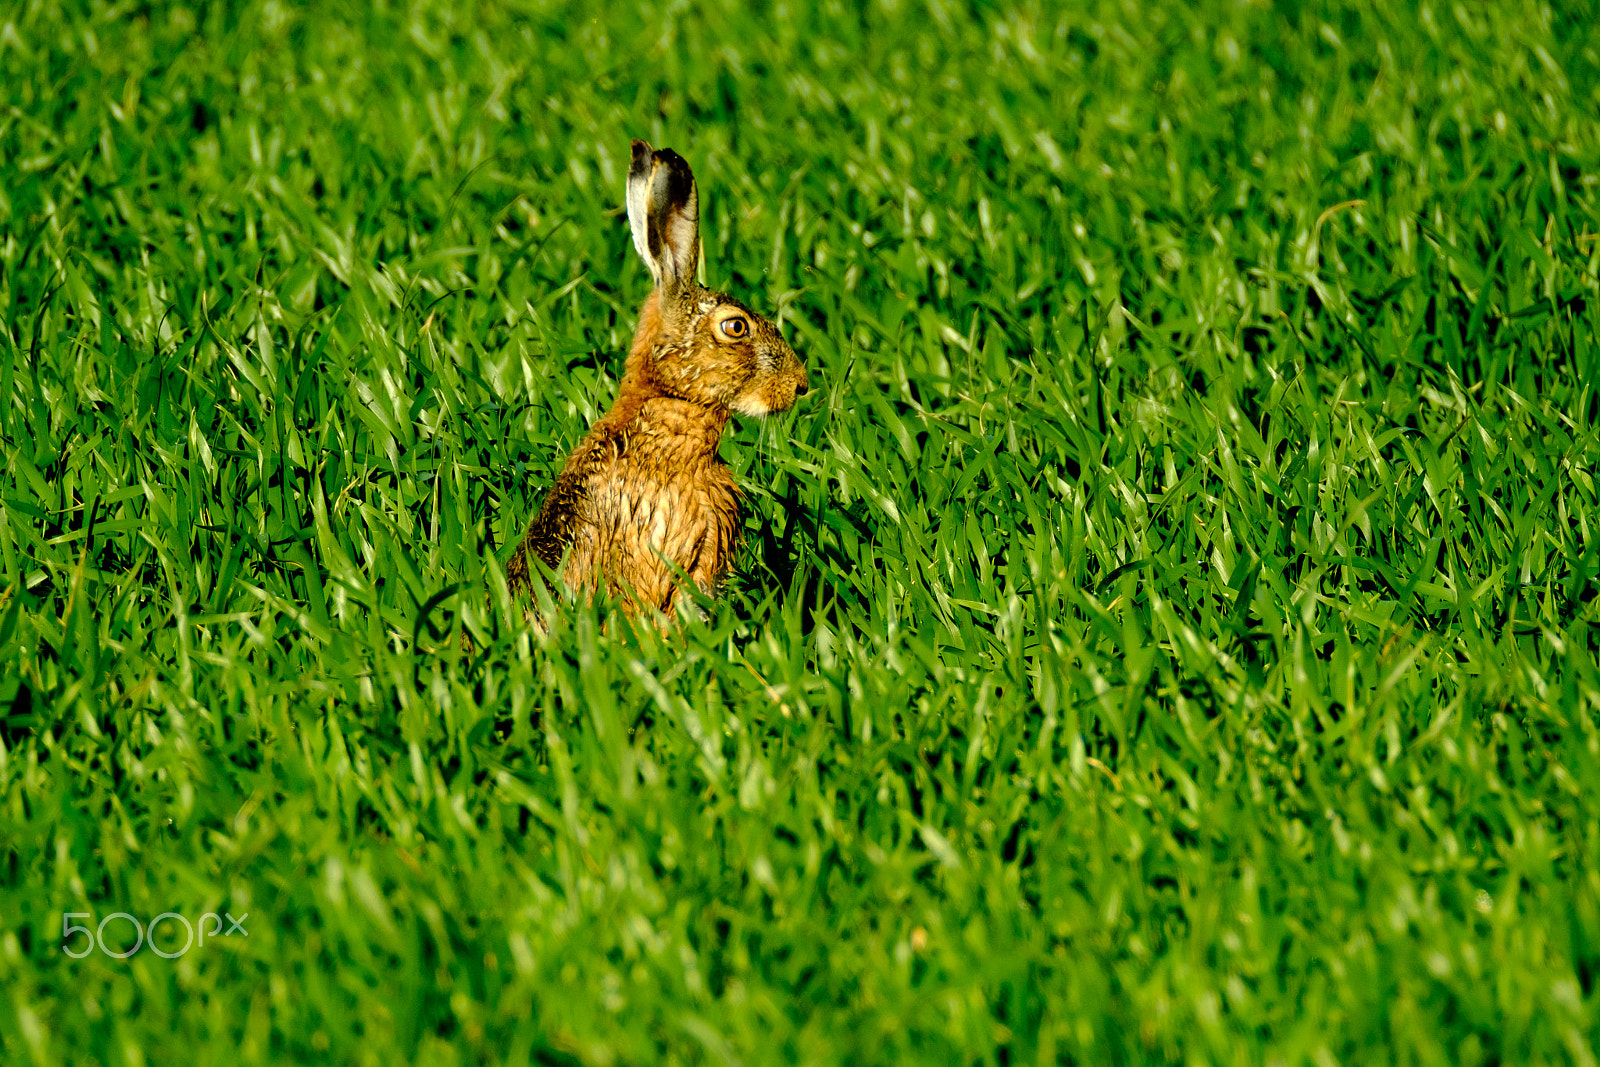 Fujifilm X-Pro2 + XF100-400mmF4.5-5.6 R LM OIS WR + 1.4x sample photo. Wild hare in the field photography